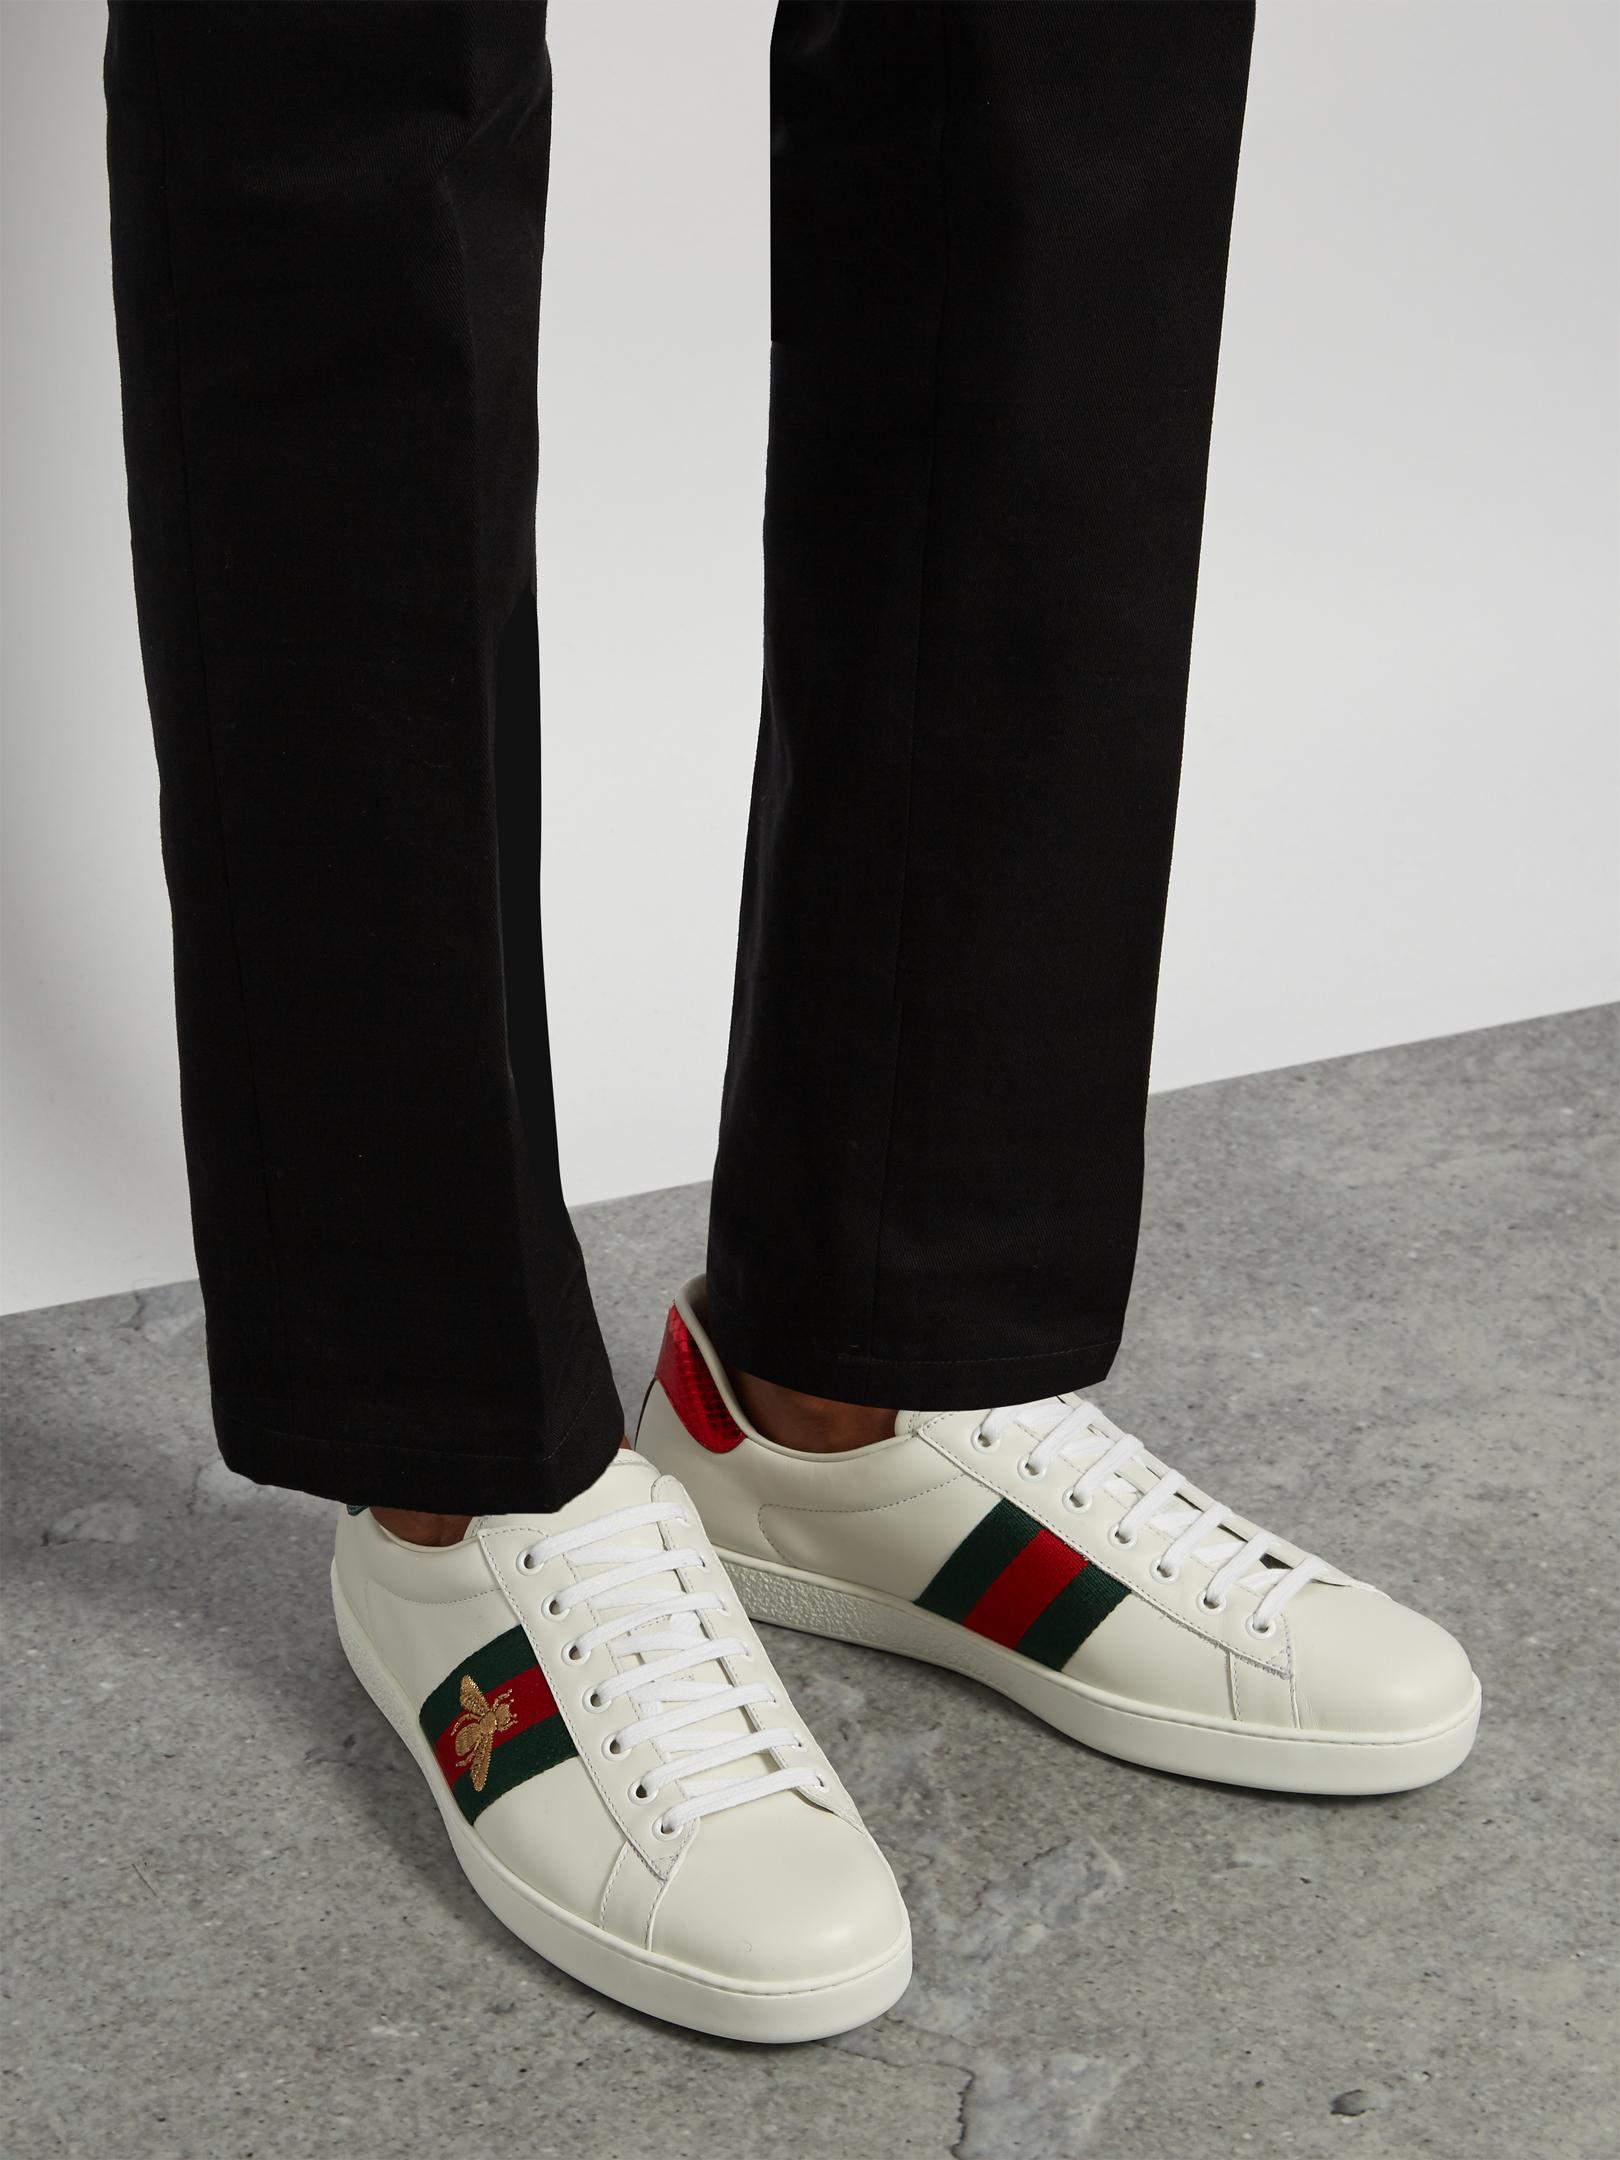 Gucci Ace Bee-embroidered Low-top Leather Trainers in White for Men - Lyst